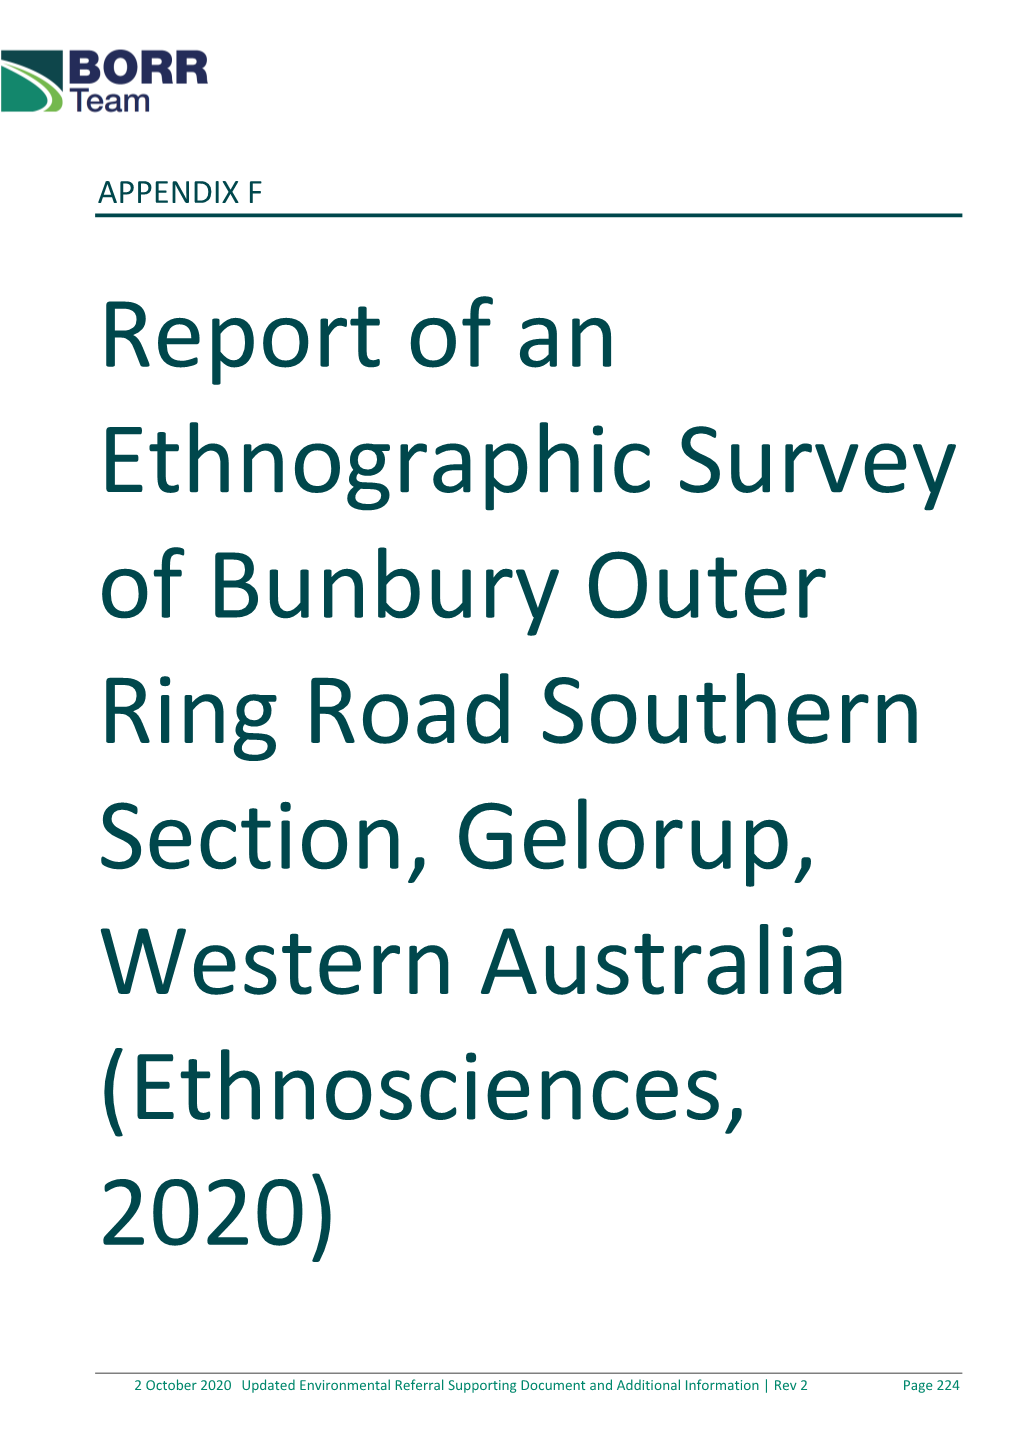 Report of an Ethnographic Survey of Bunbury Outer Ring Road Southern Section, Gelorup, Western Australia (Ethnosciences